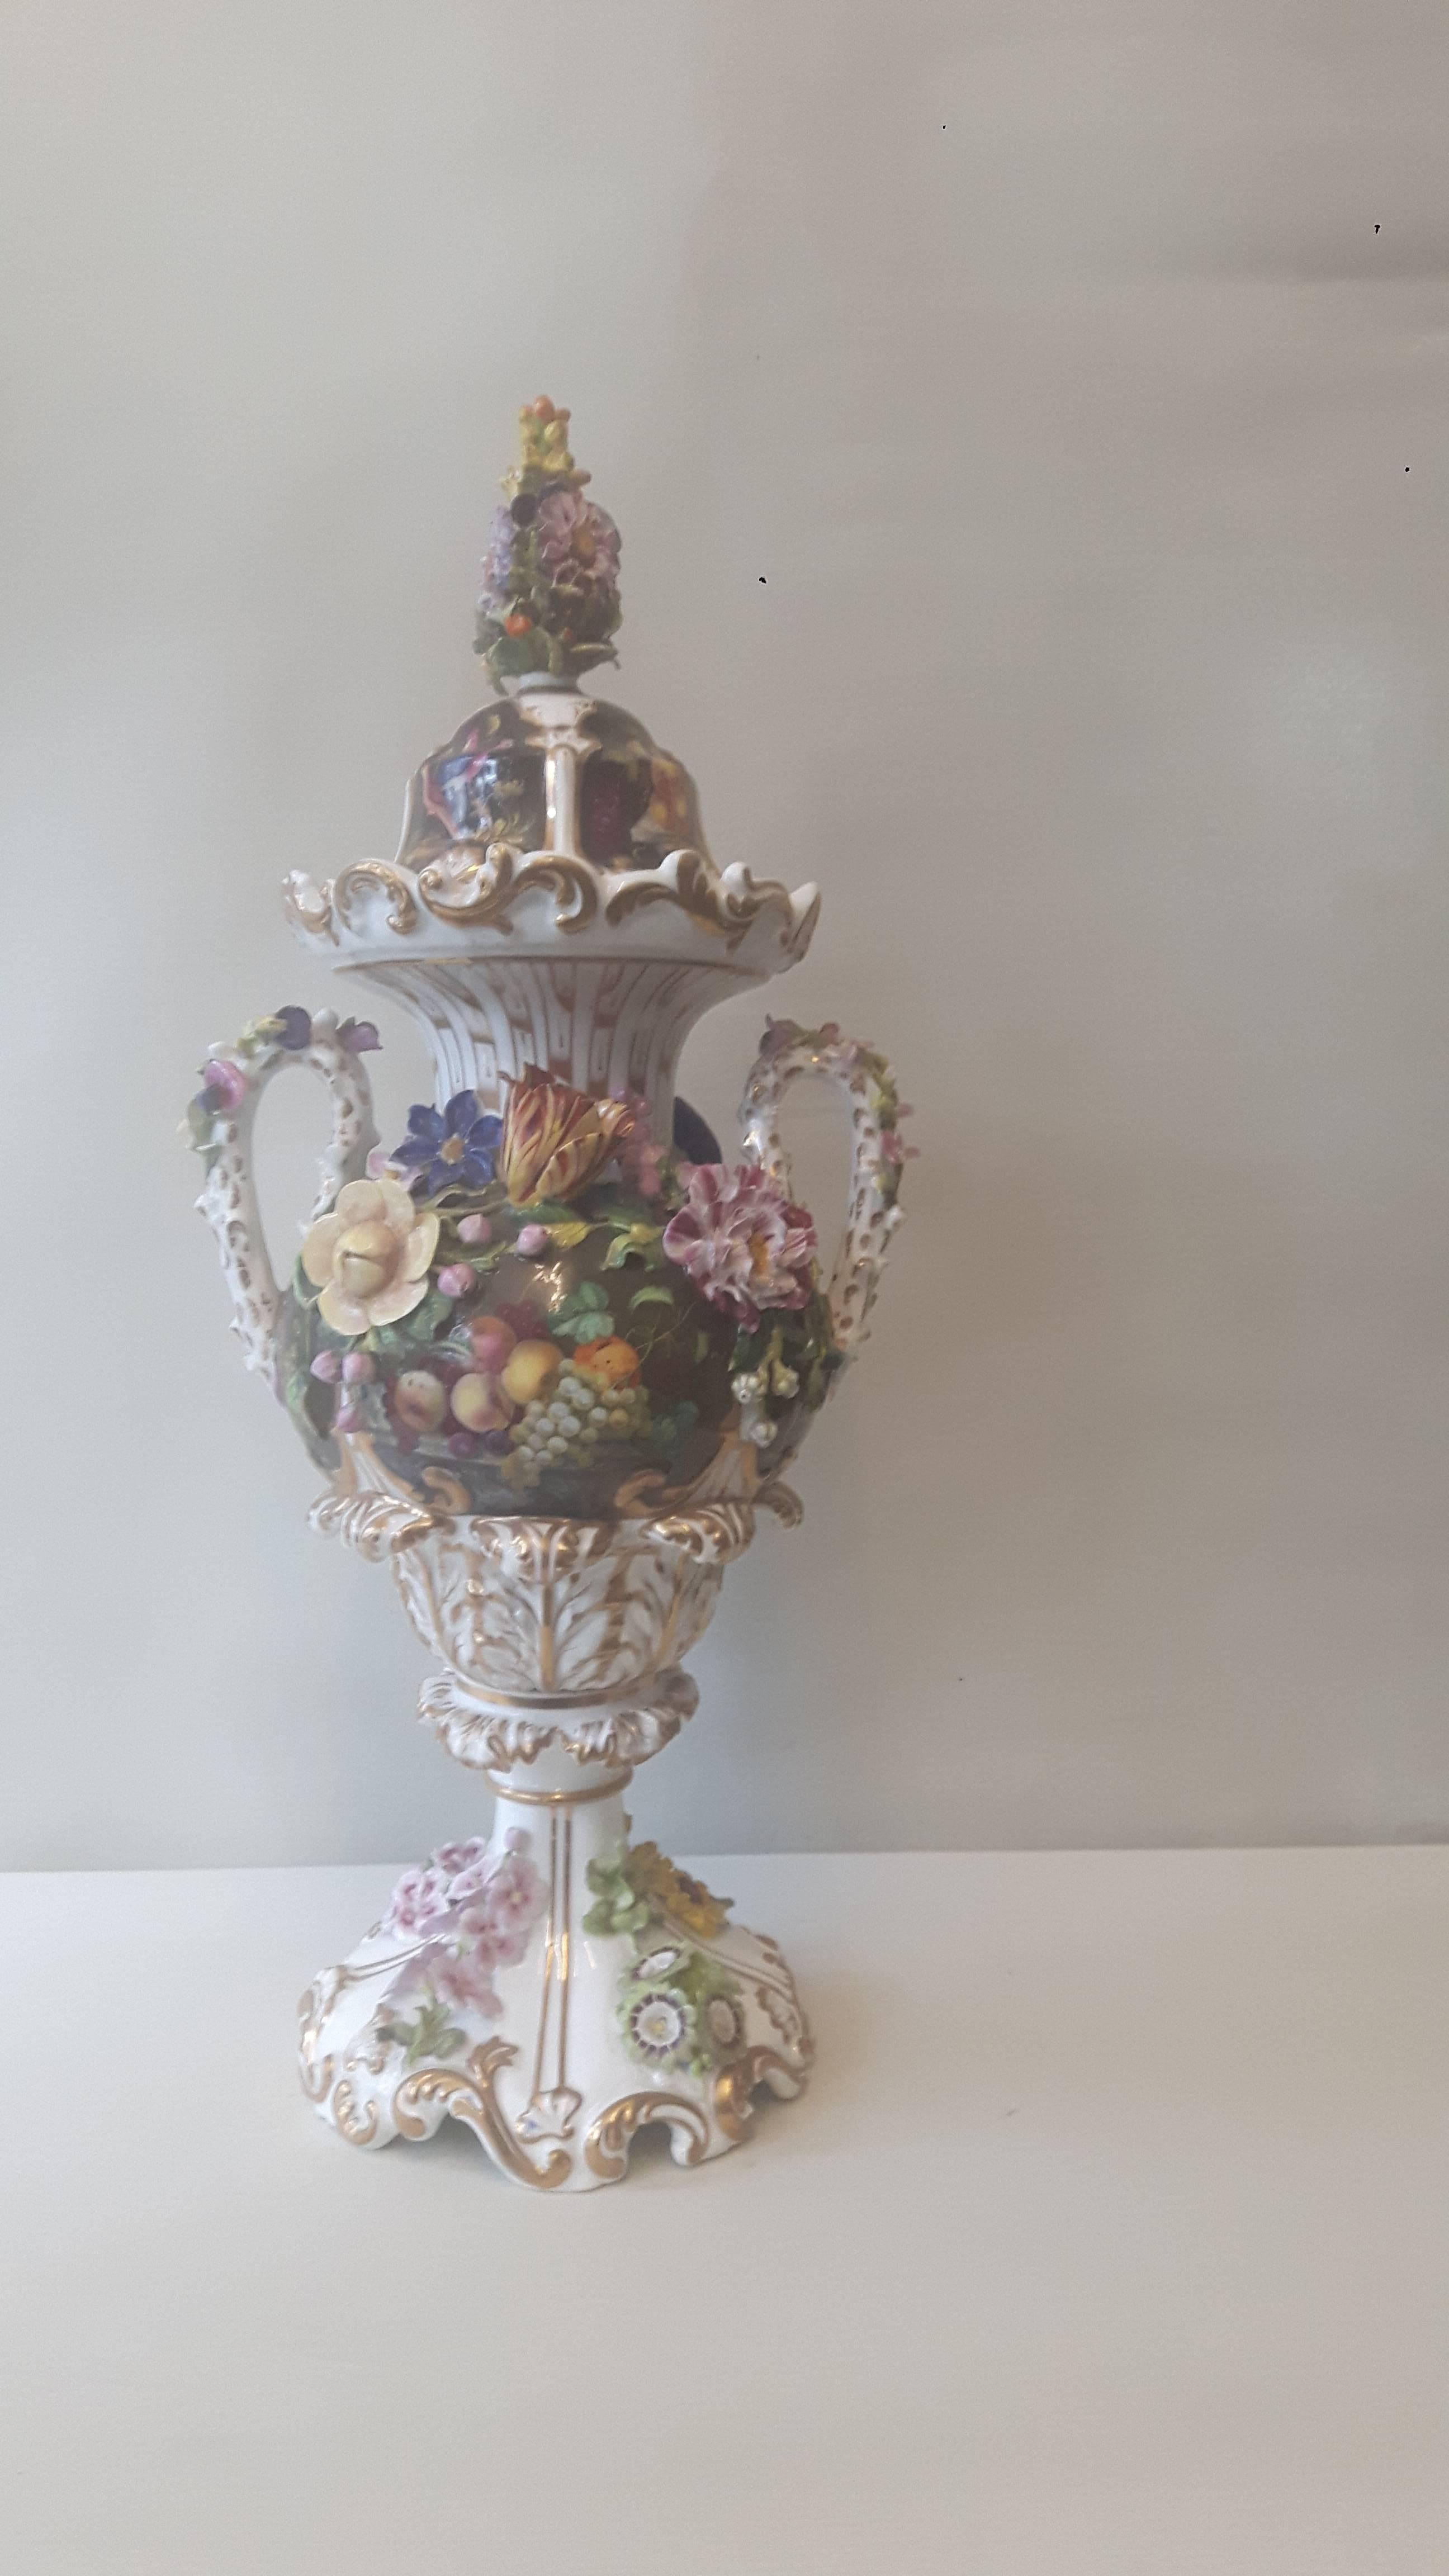 An elegant English porcelain vase and cover, first quarter of the 19th century, probably from the Derby factory, with hand-painted panels of birds and fruit and flower scenes, with encrusted flowers.